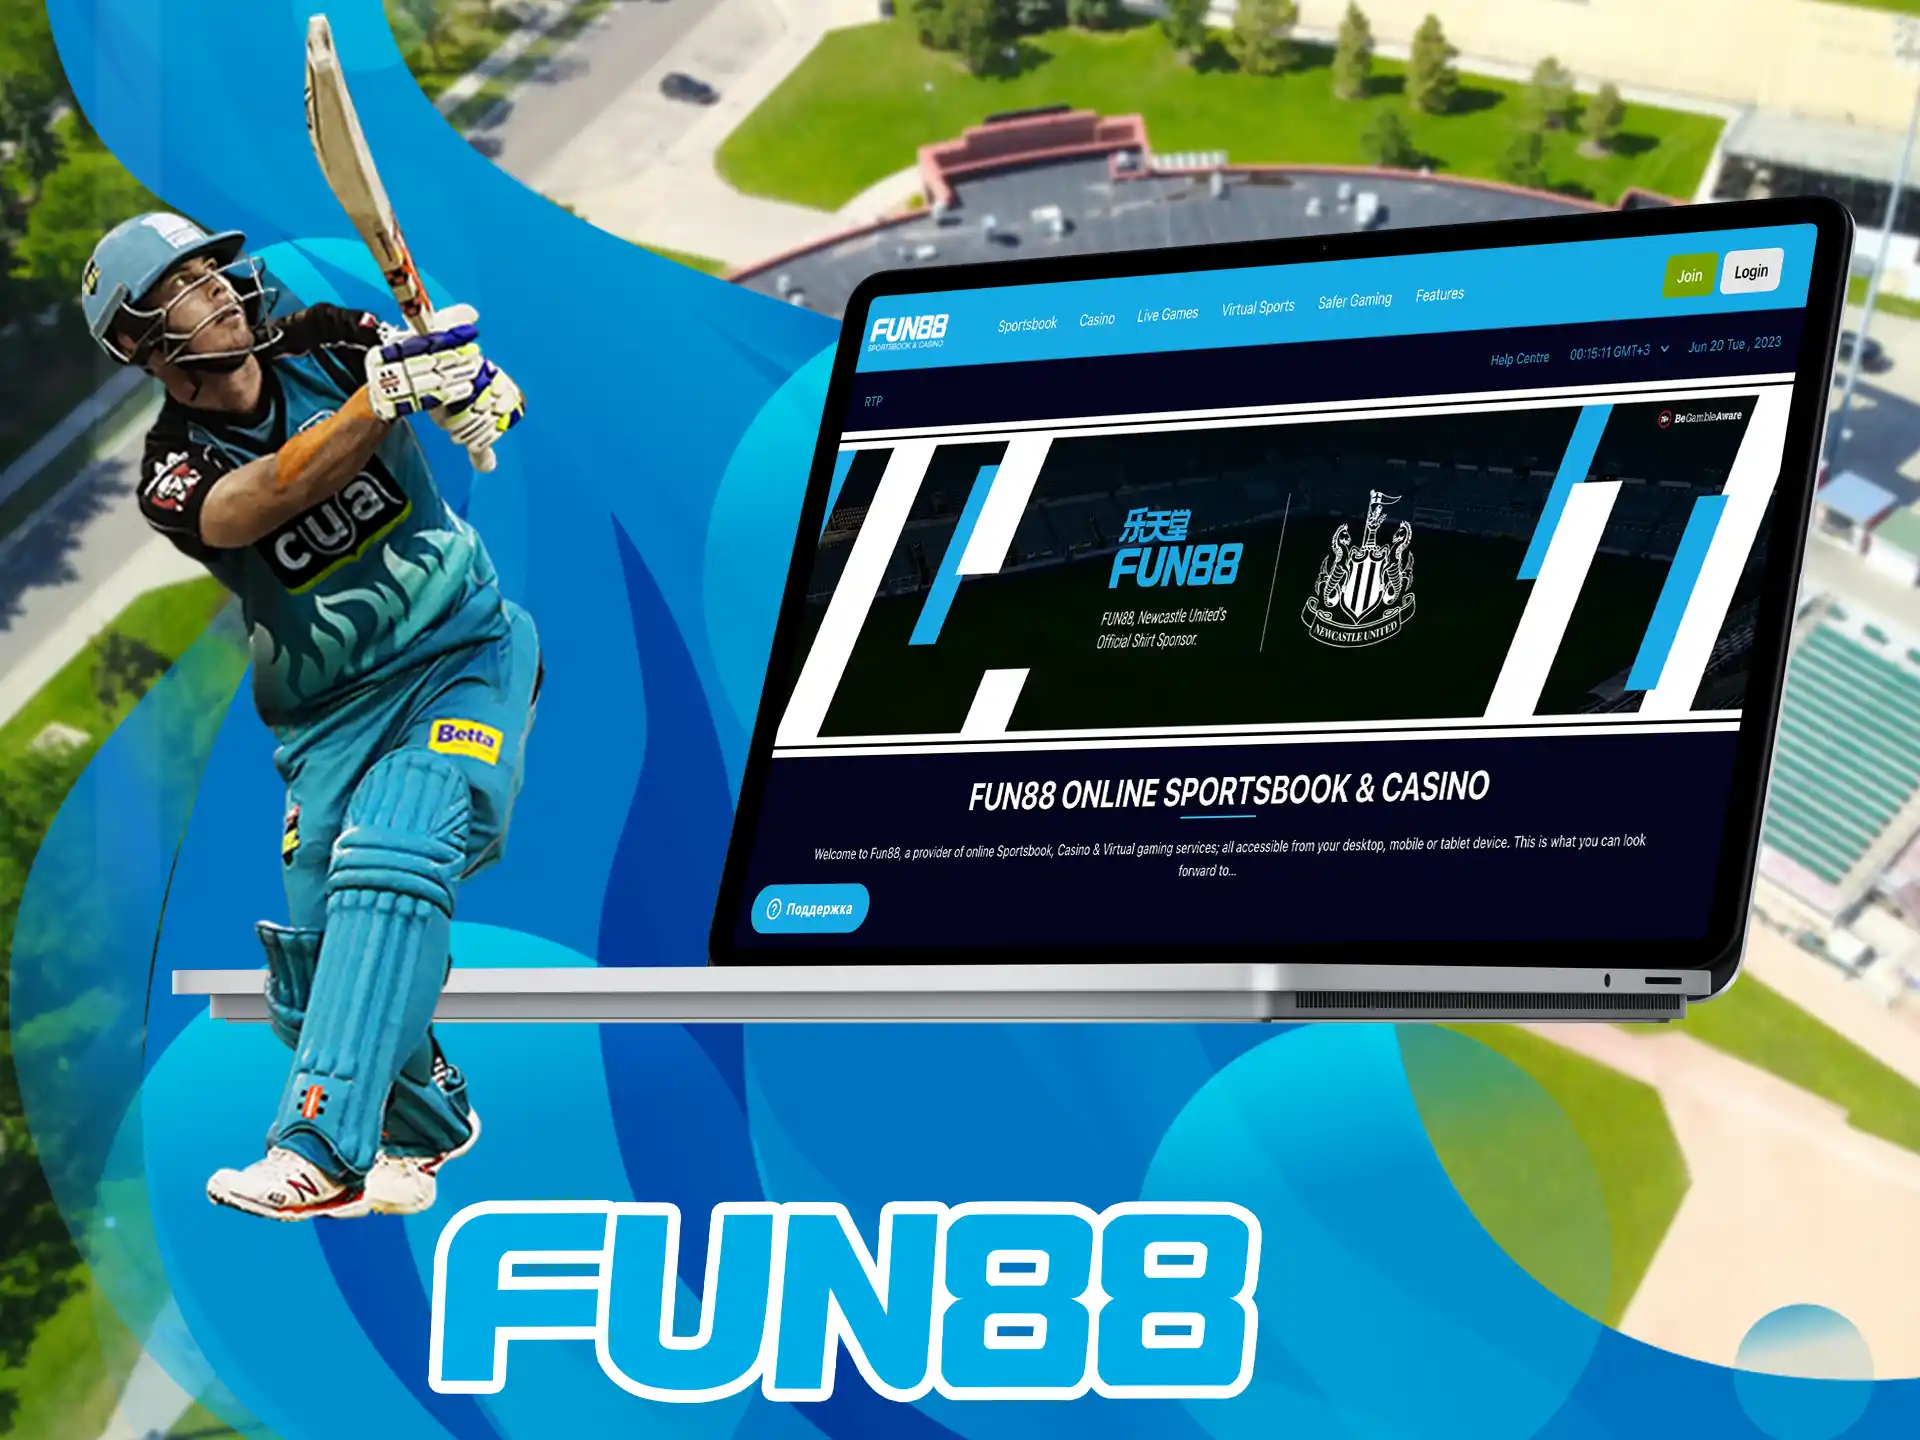 If you're a fan of cricket - then Fun88 is for you, here you will find bets on this wonderful sport, as well as many other disciplines.